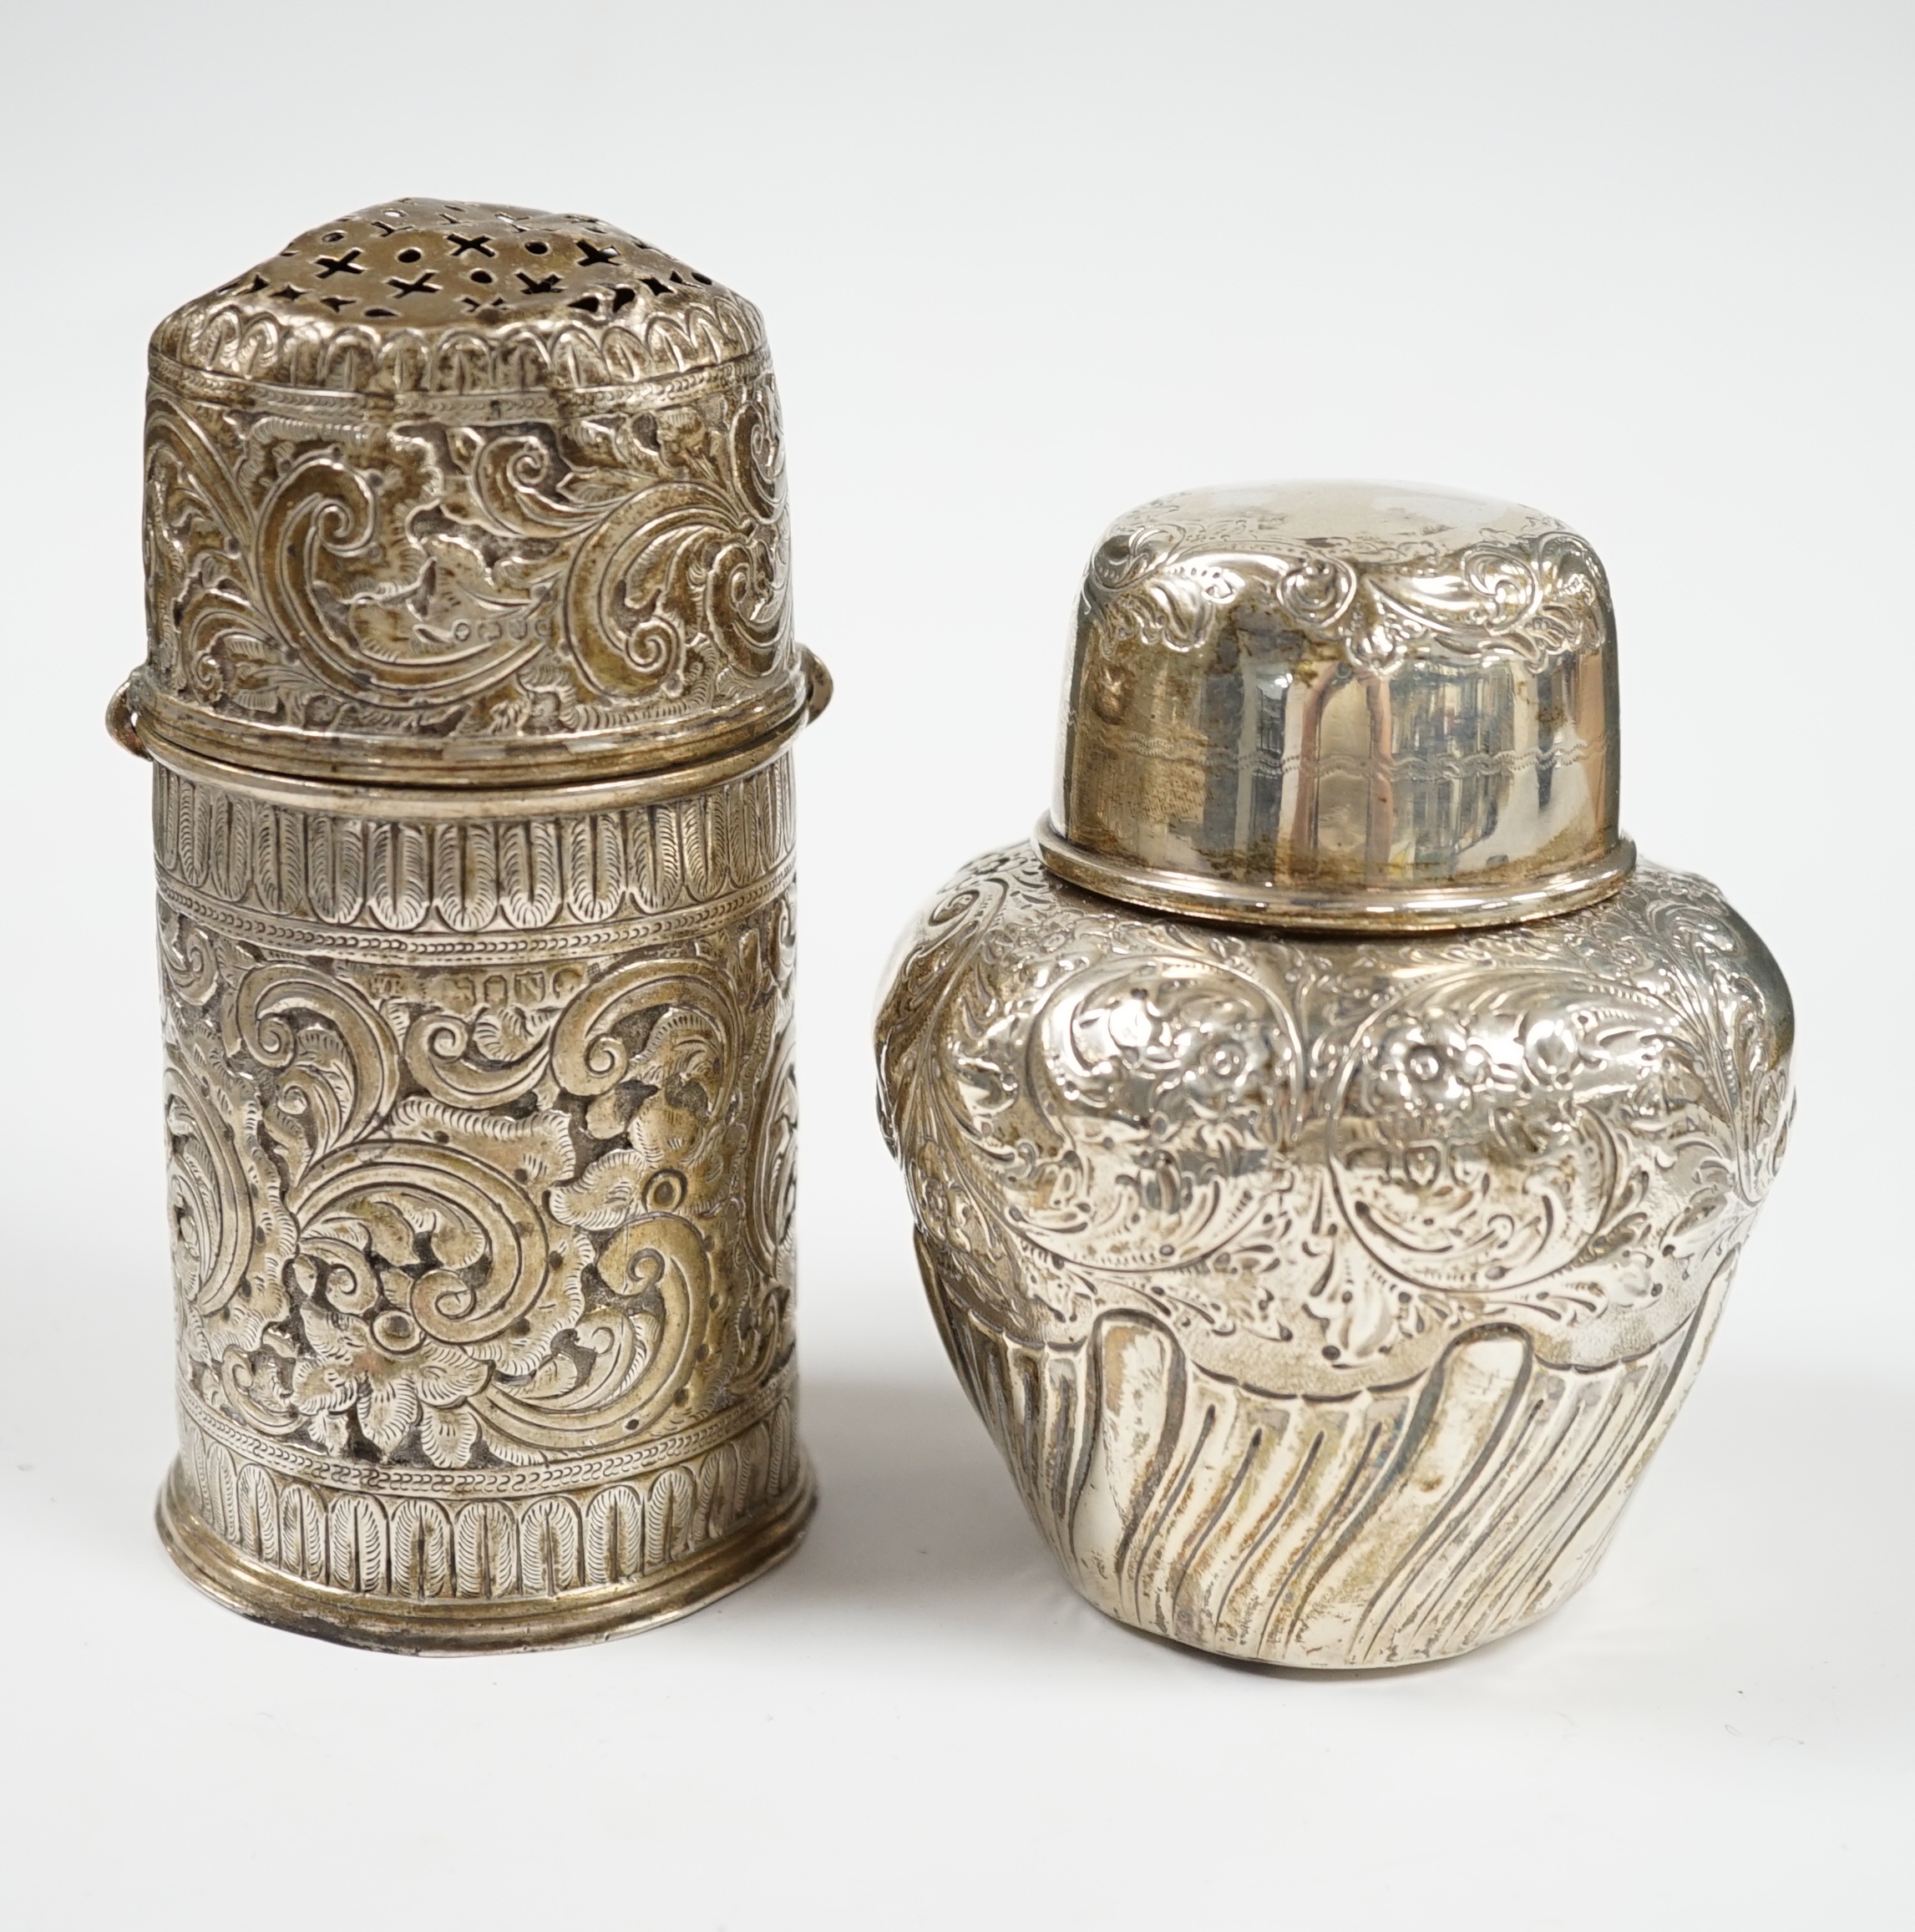 A late Victorian repousse demi-fluted wrythened silver tea caddy and cover, W & C Sissons, London, 1895, 10.3cm, together with a similar repousse silver lighthouse sugar caster, London, 1888, 10oz. Condition - poor